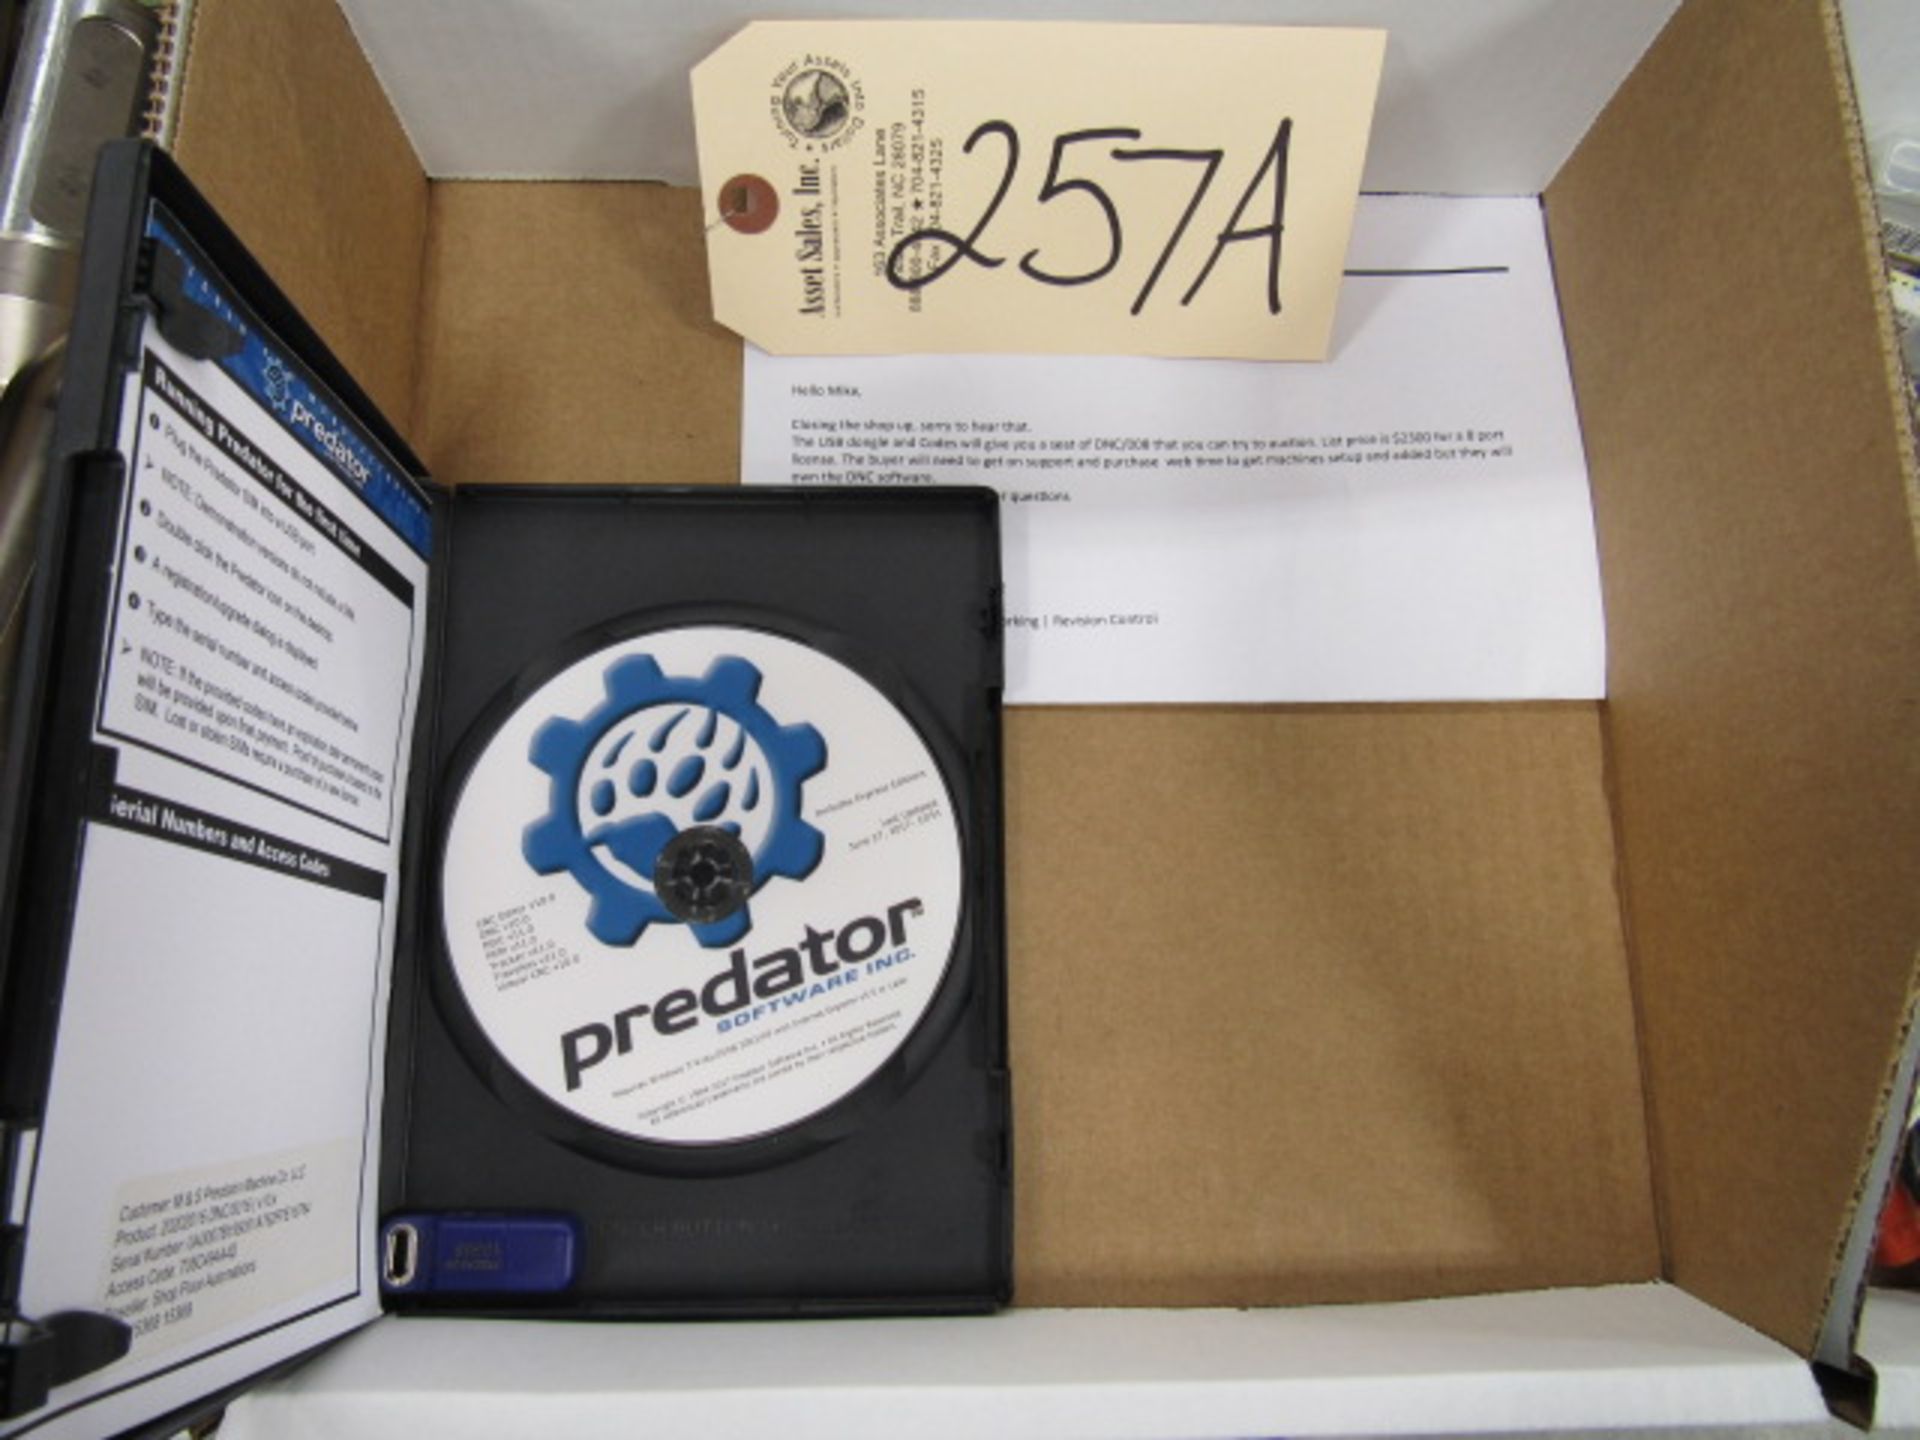 Predator CNC / DNC / MDC Express Software with USB Dongle & Codes, New Price is $2300 for an 8- - Image 2 of 3